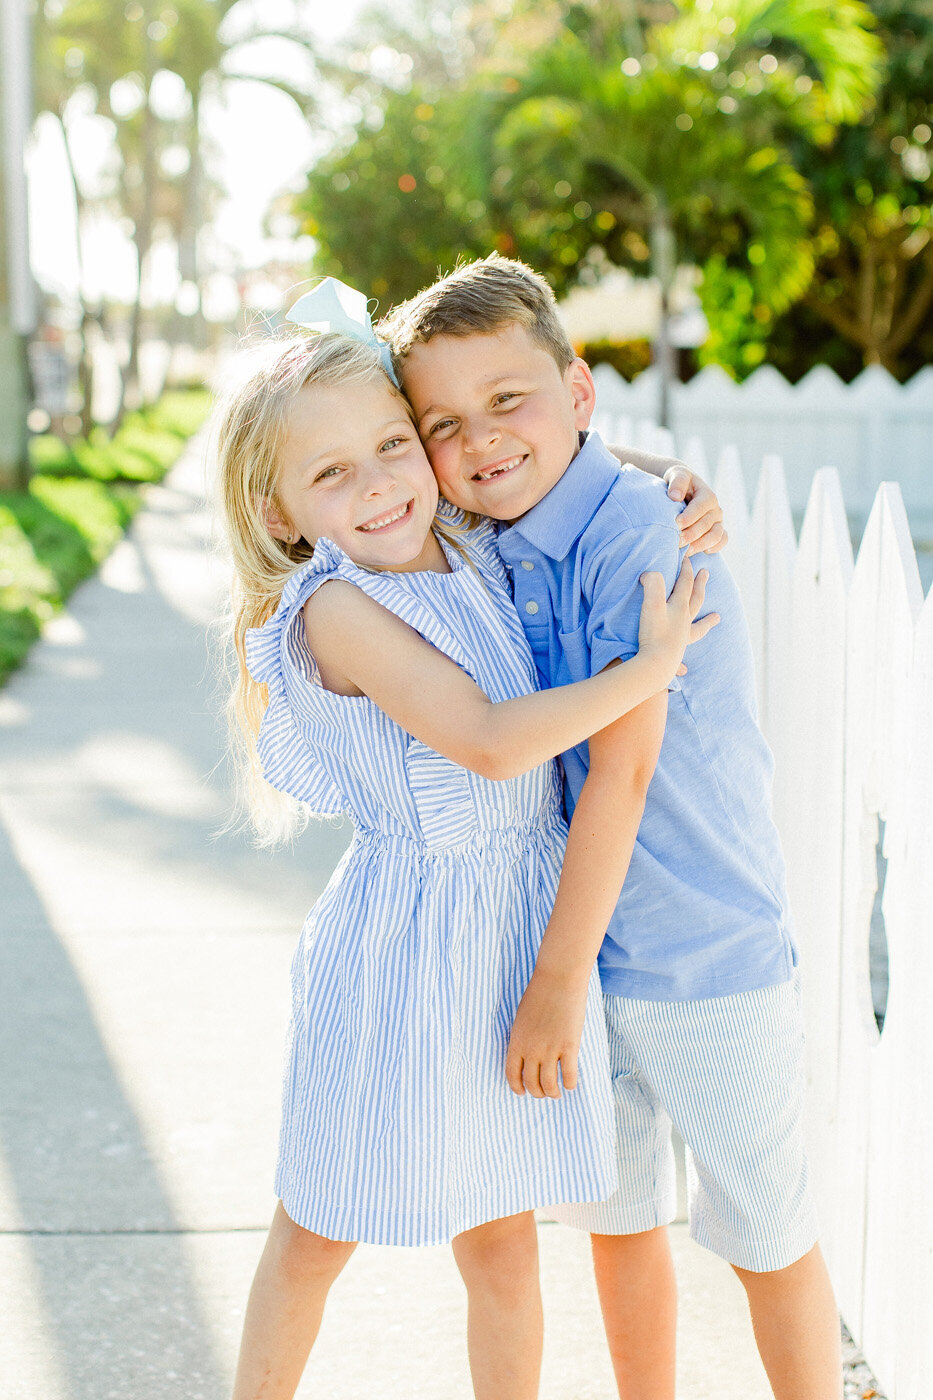 Tampa Family Photographer - Ailyn LaTorre 37